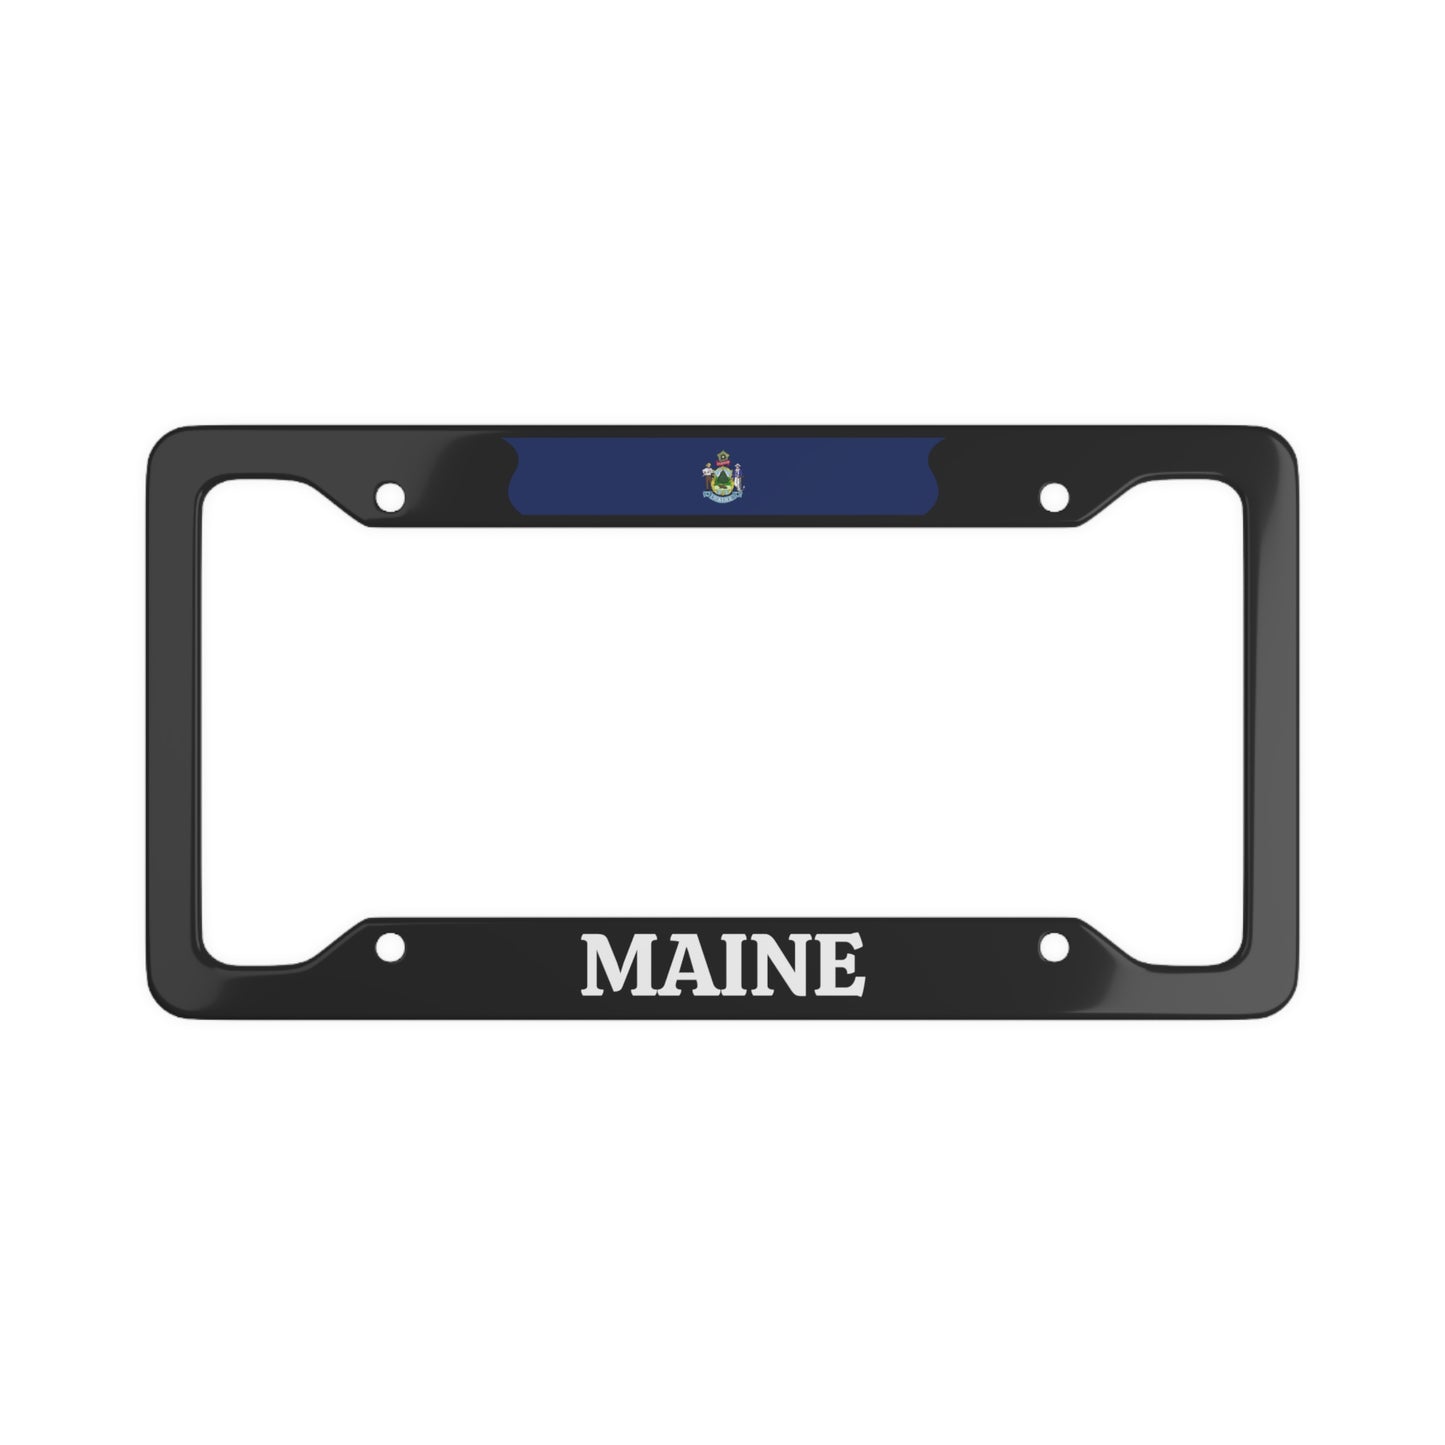 Mainer, Maine State, USA License Plate Frame